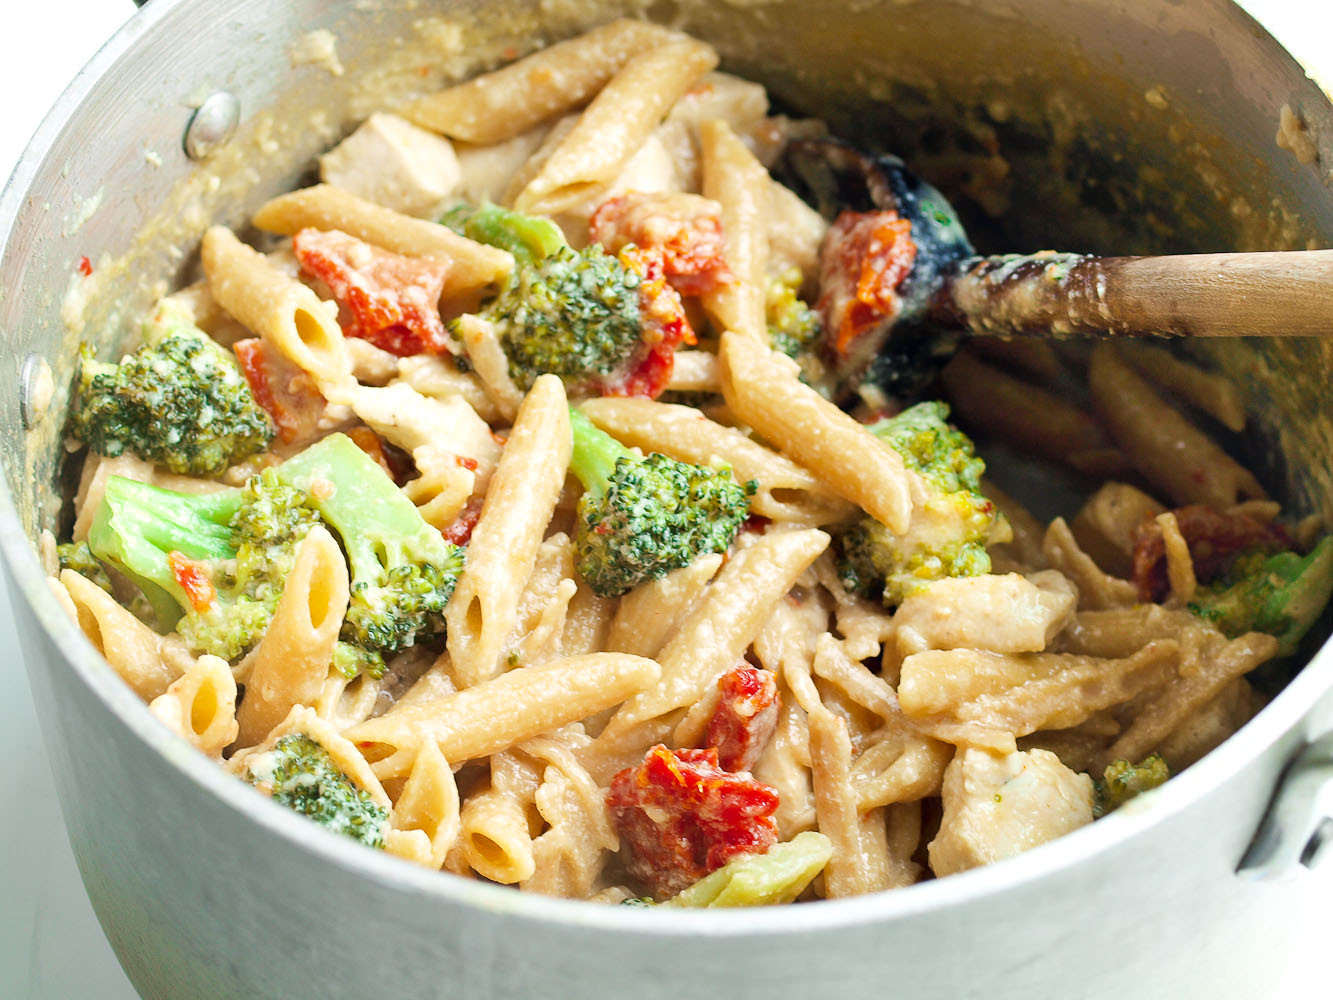 Healthy Dinner Ideas For Kids
 Tangy e Pot Chicken and Veggie Pasta Dinner